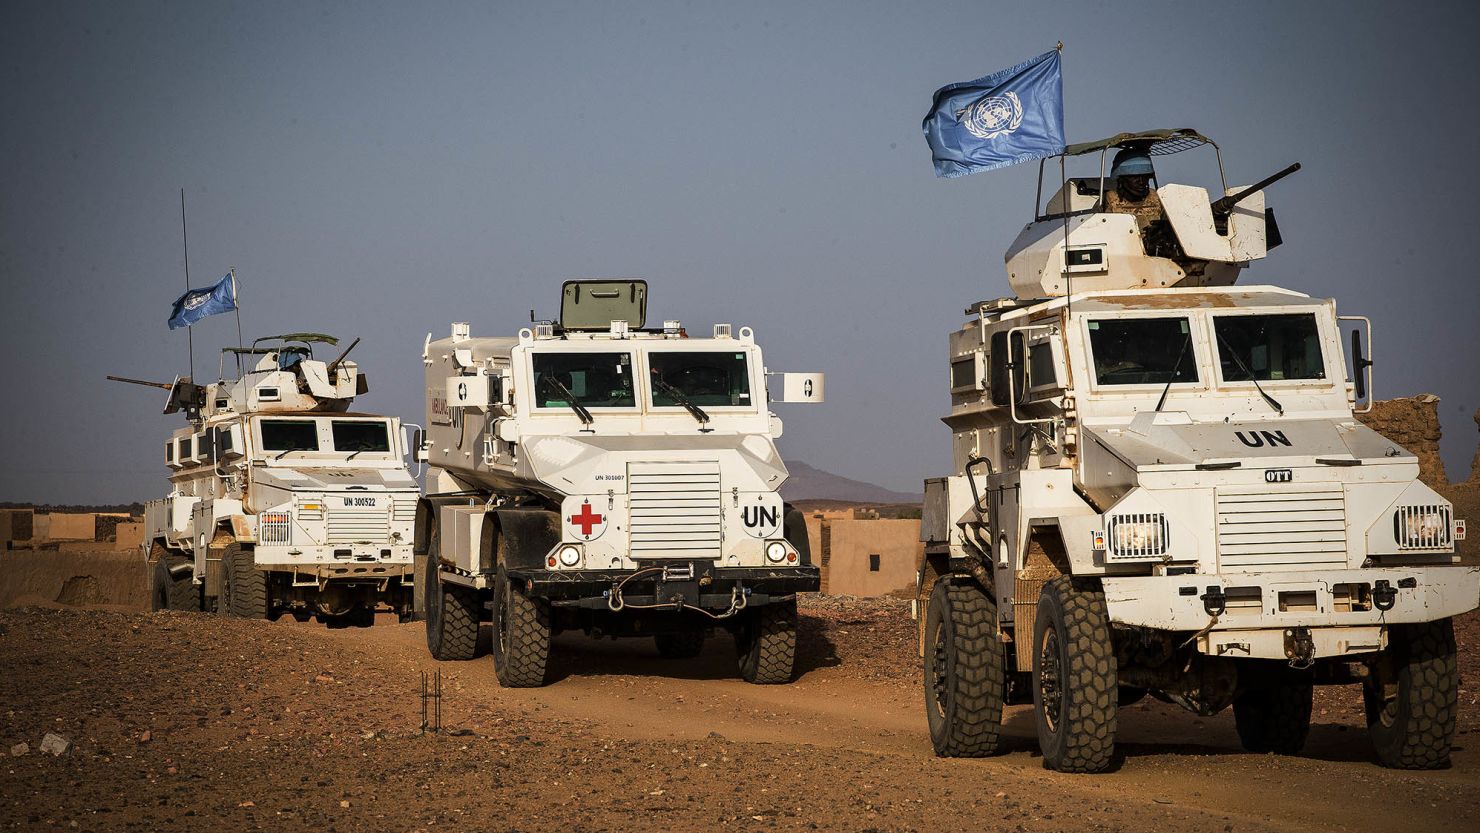 Troops from the UN peacekeeping mission in Mali